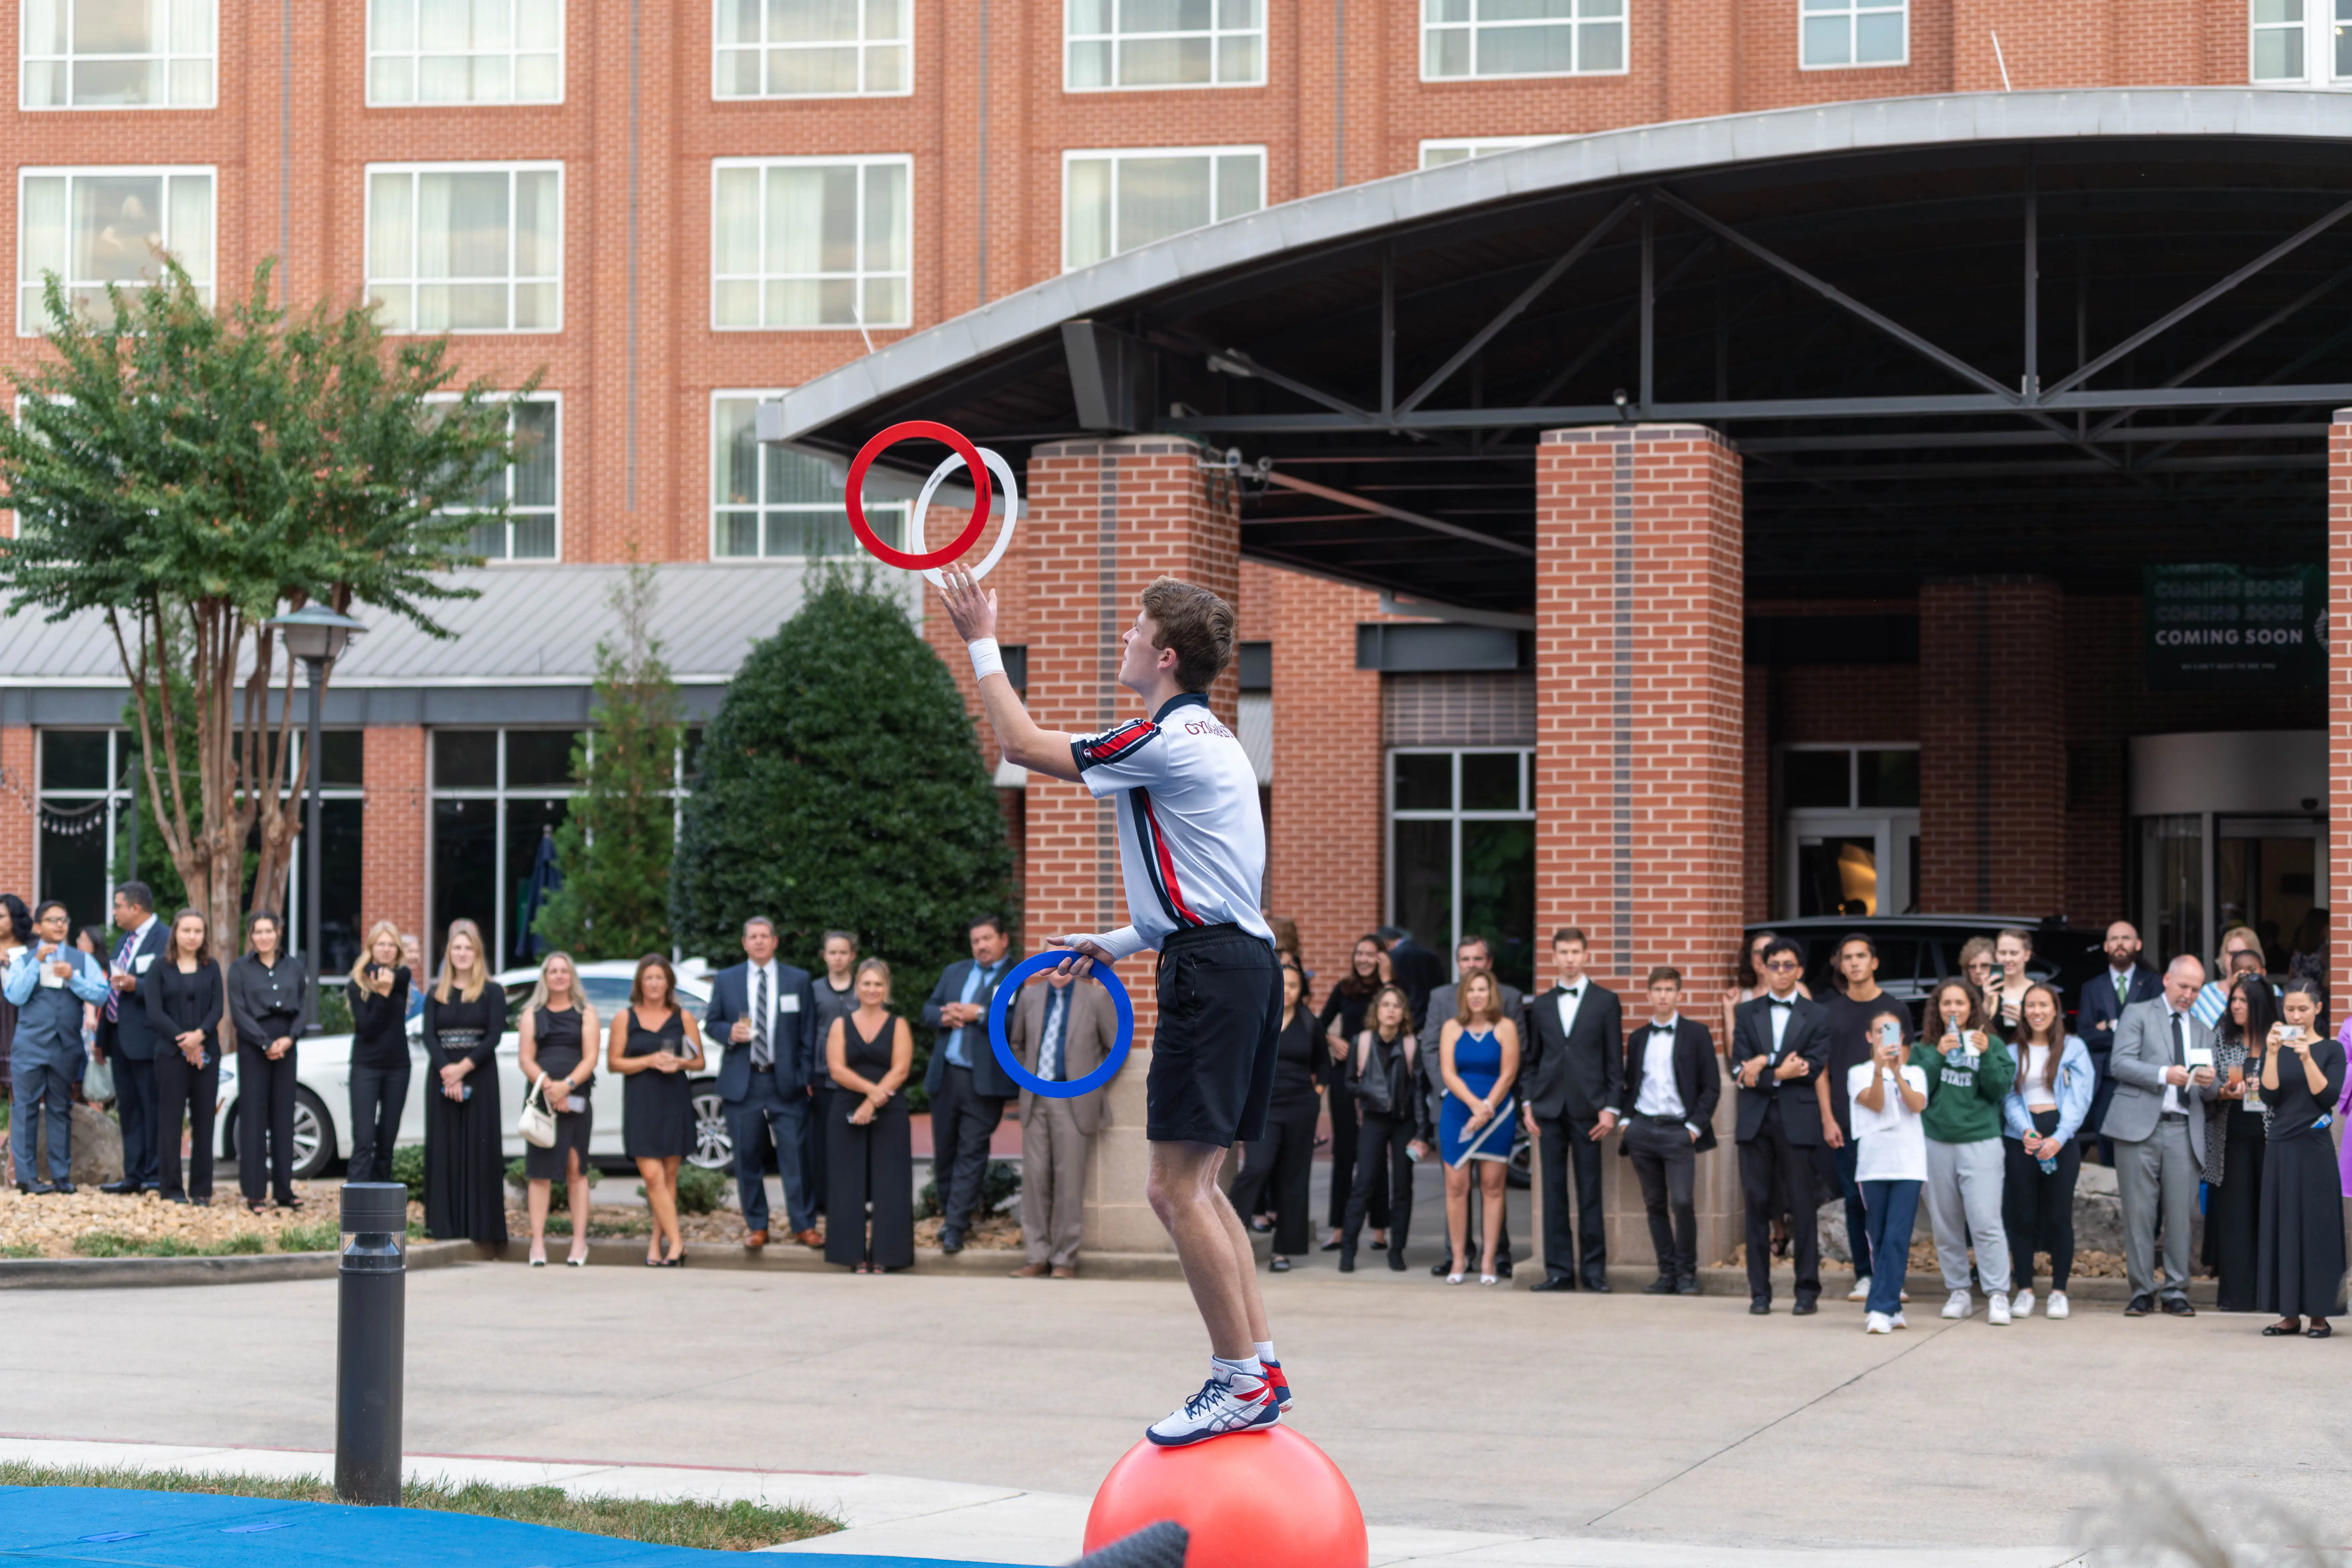 A Gym-Masters team member performing for guests outside of The Chattanoogan Hotel